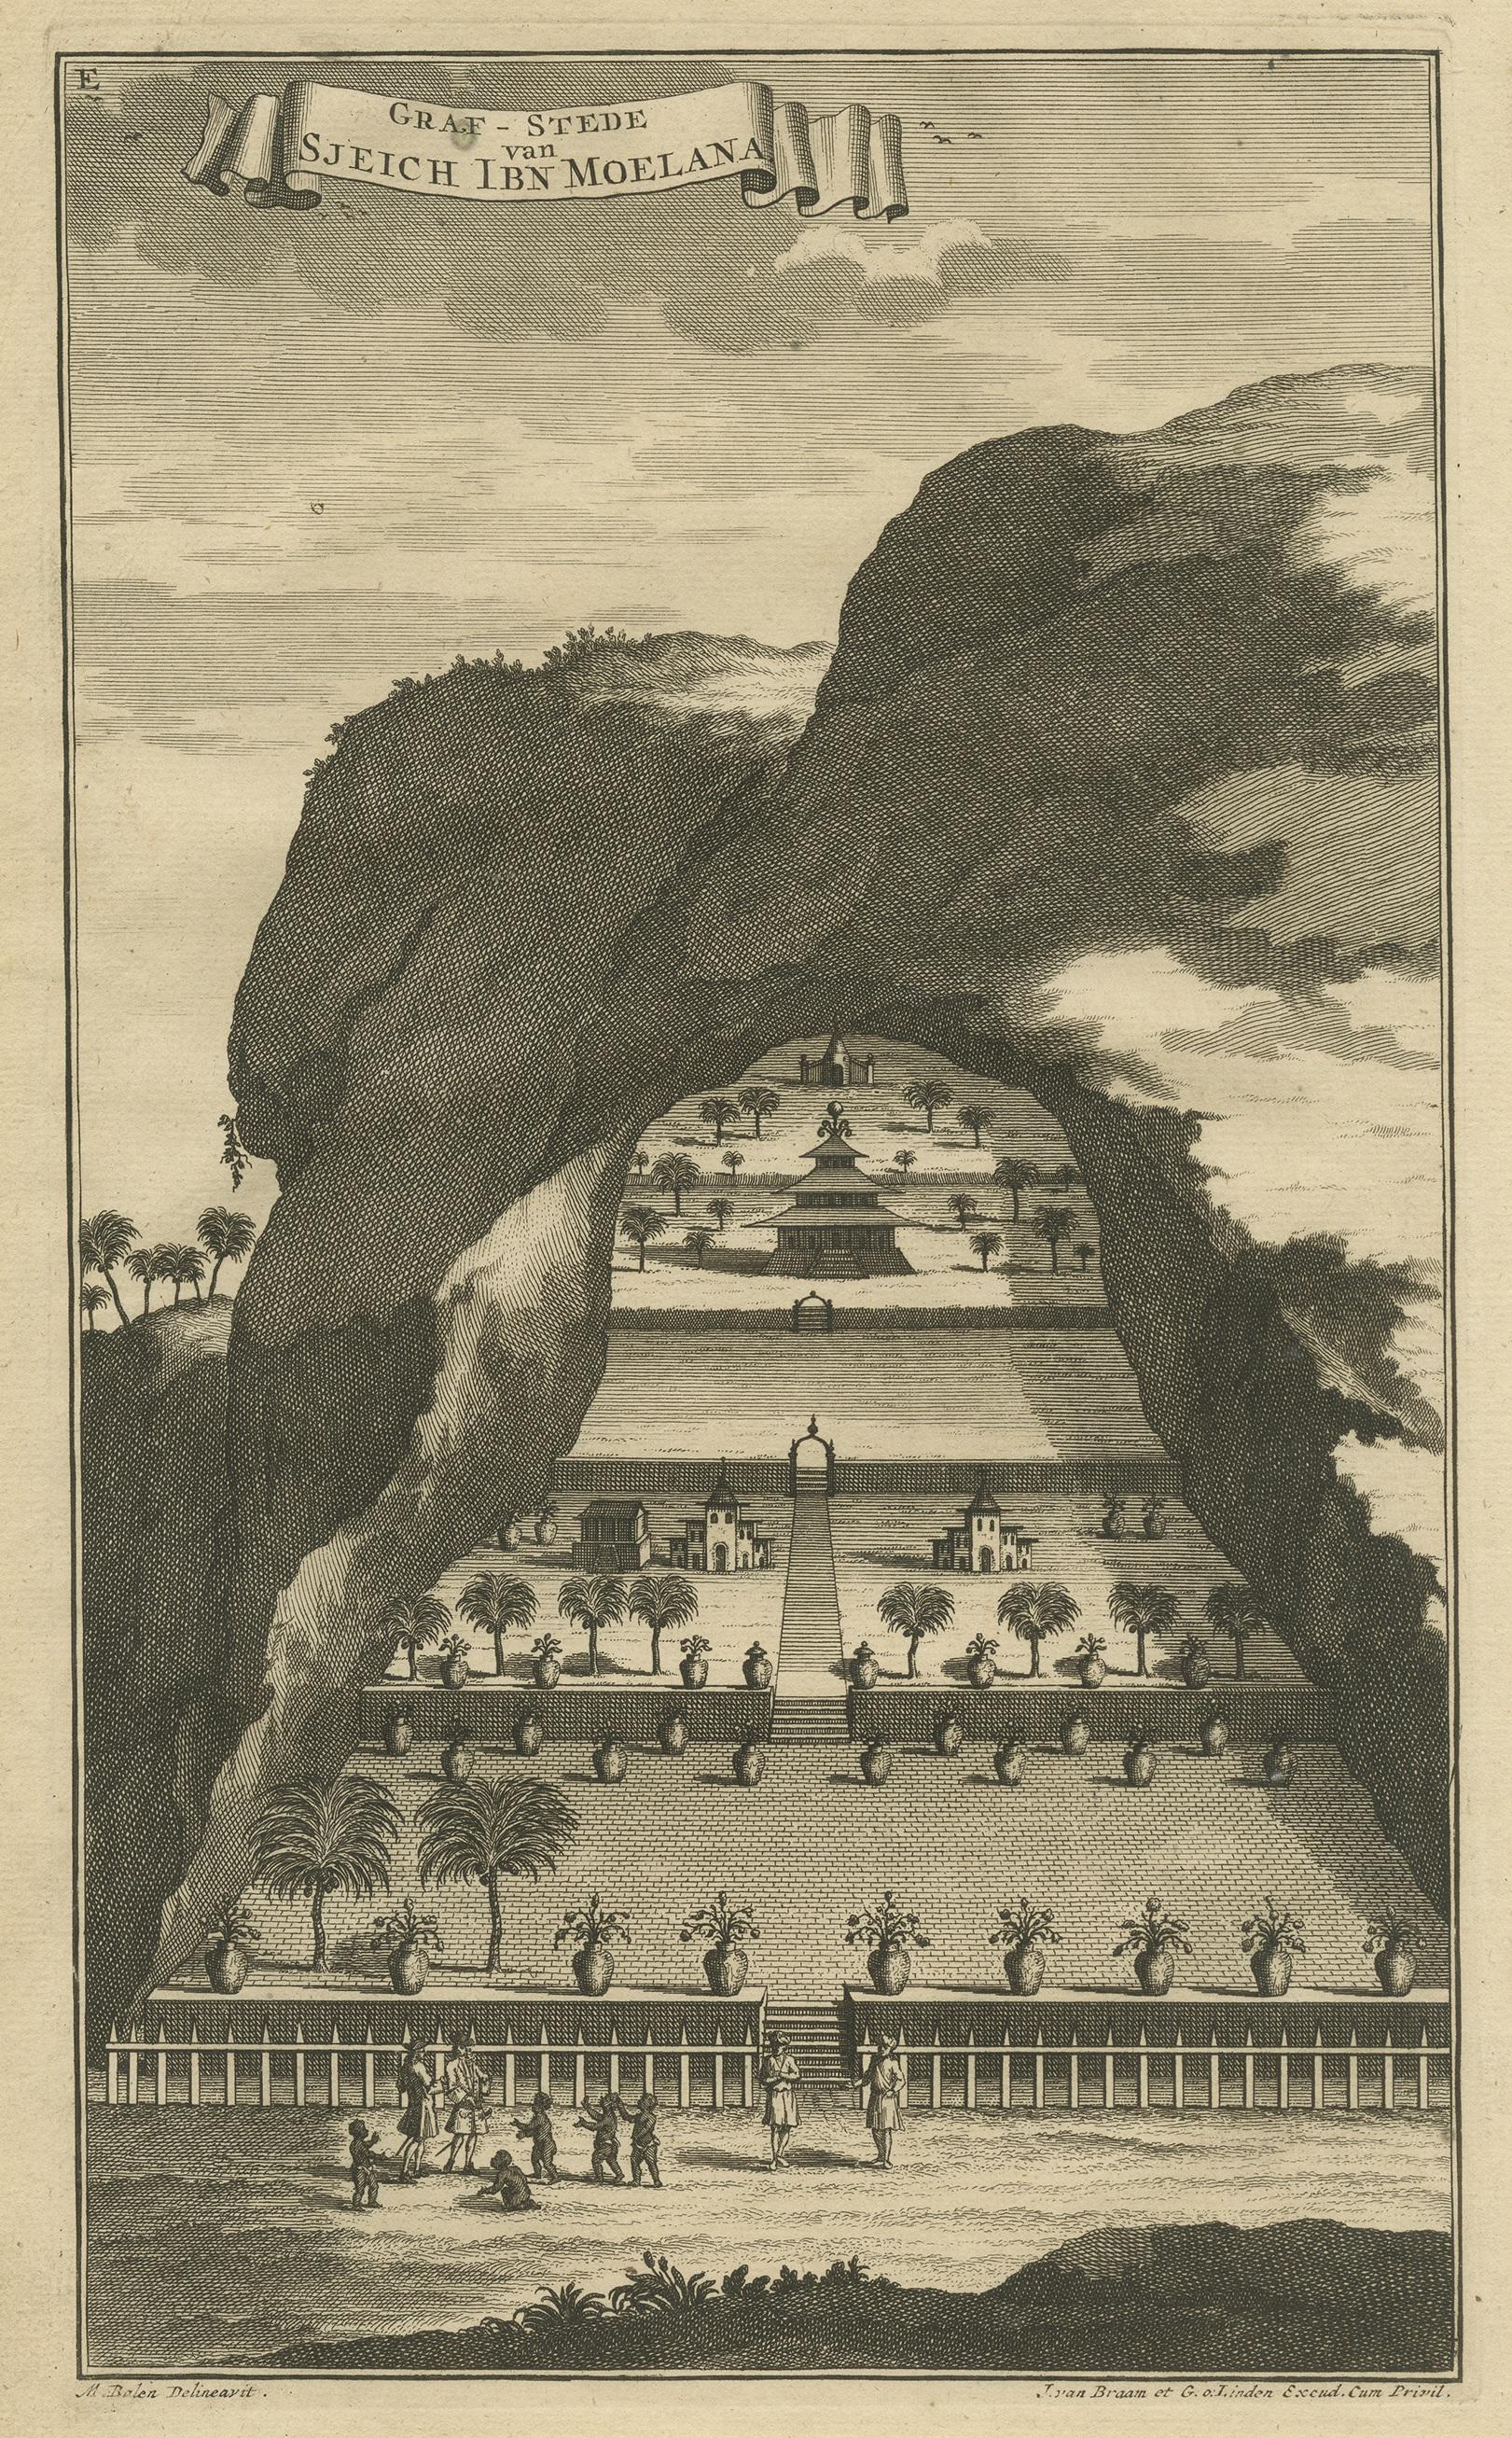 Antique print of the tomb of Sheikh Ibn Moelana. This print originates from 'Oud en Nieuw Oost-Indiën' by F. Valentijn.